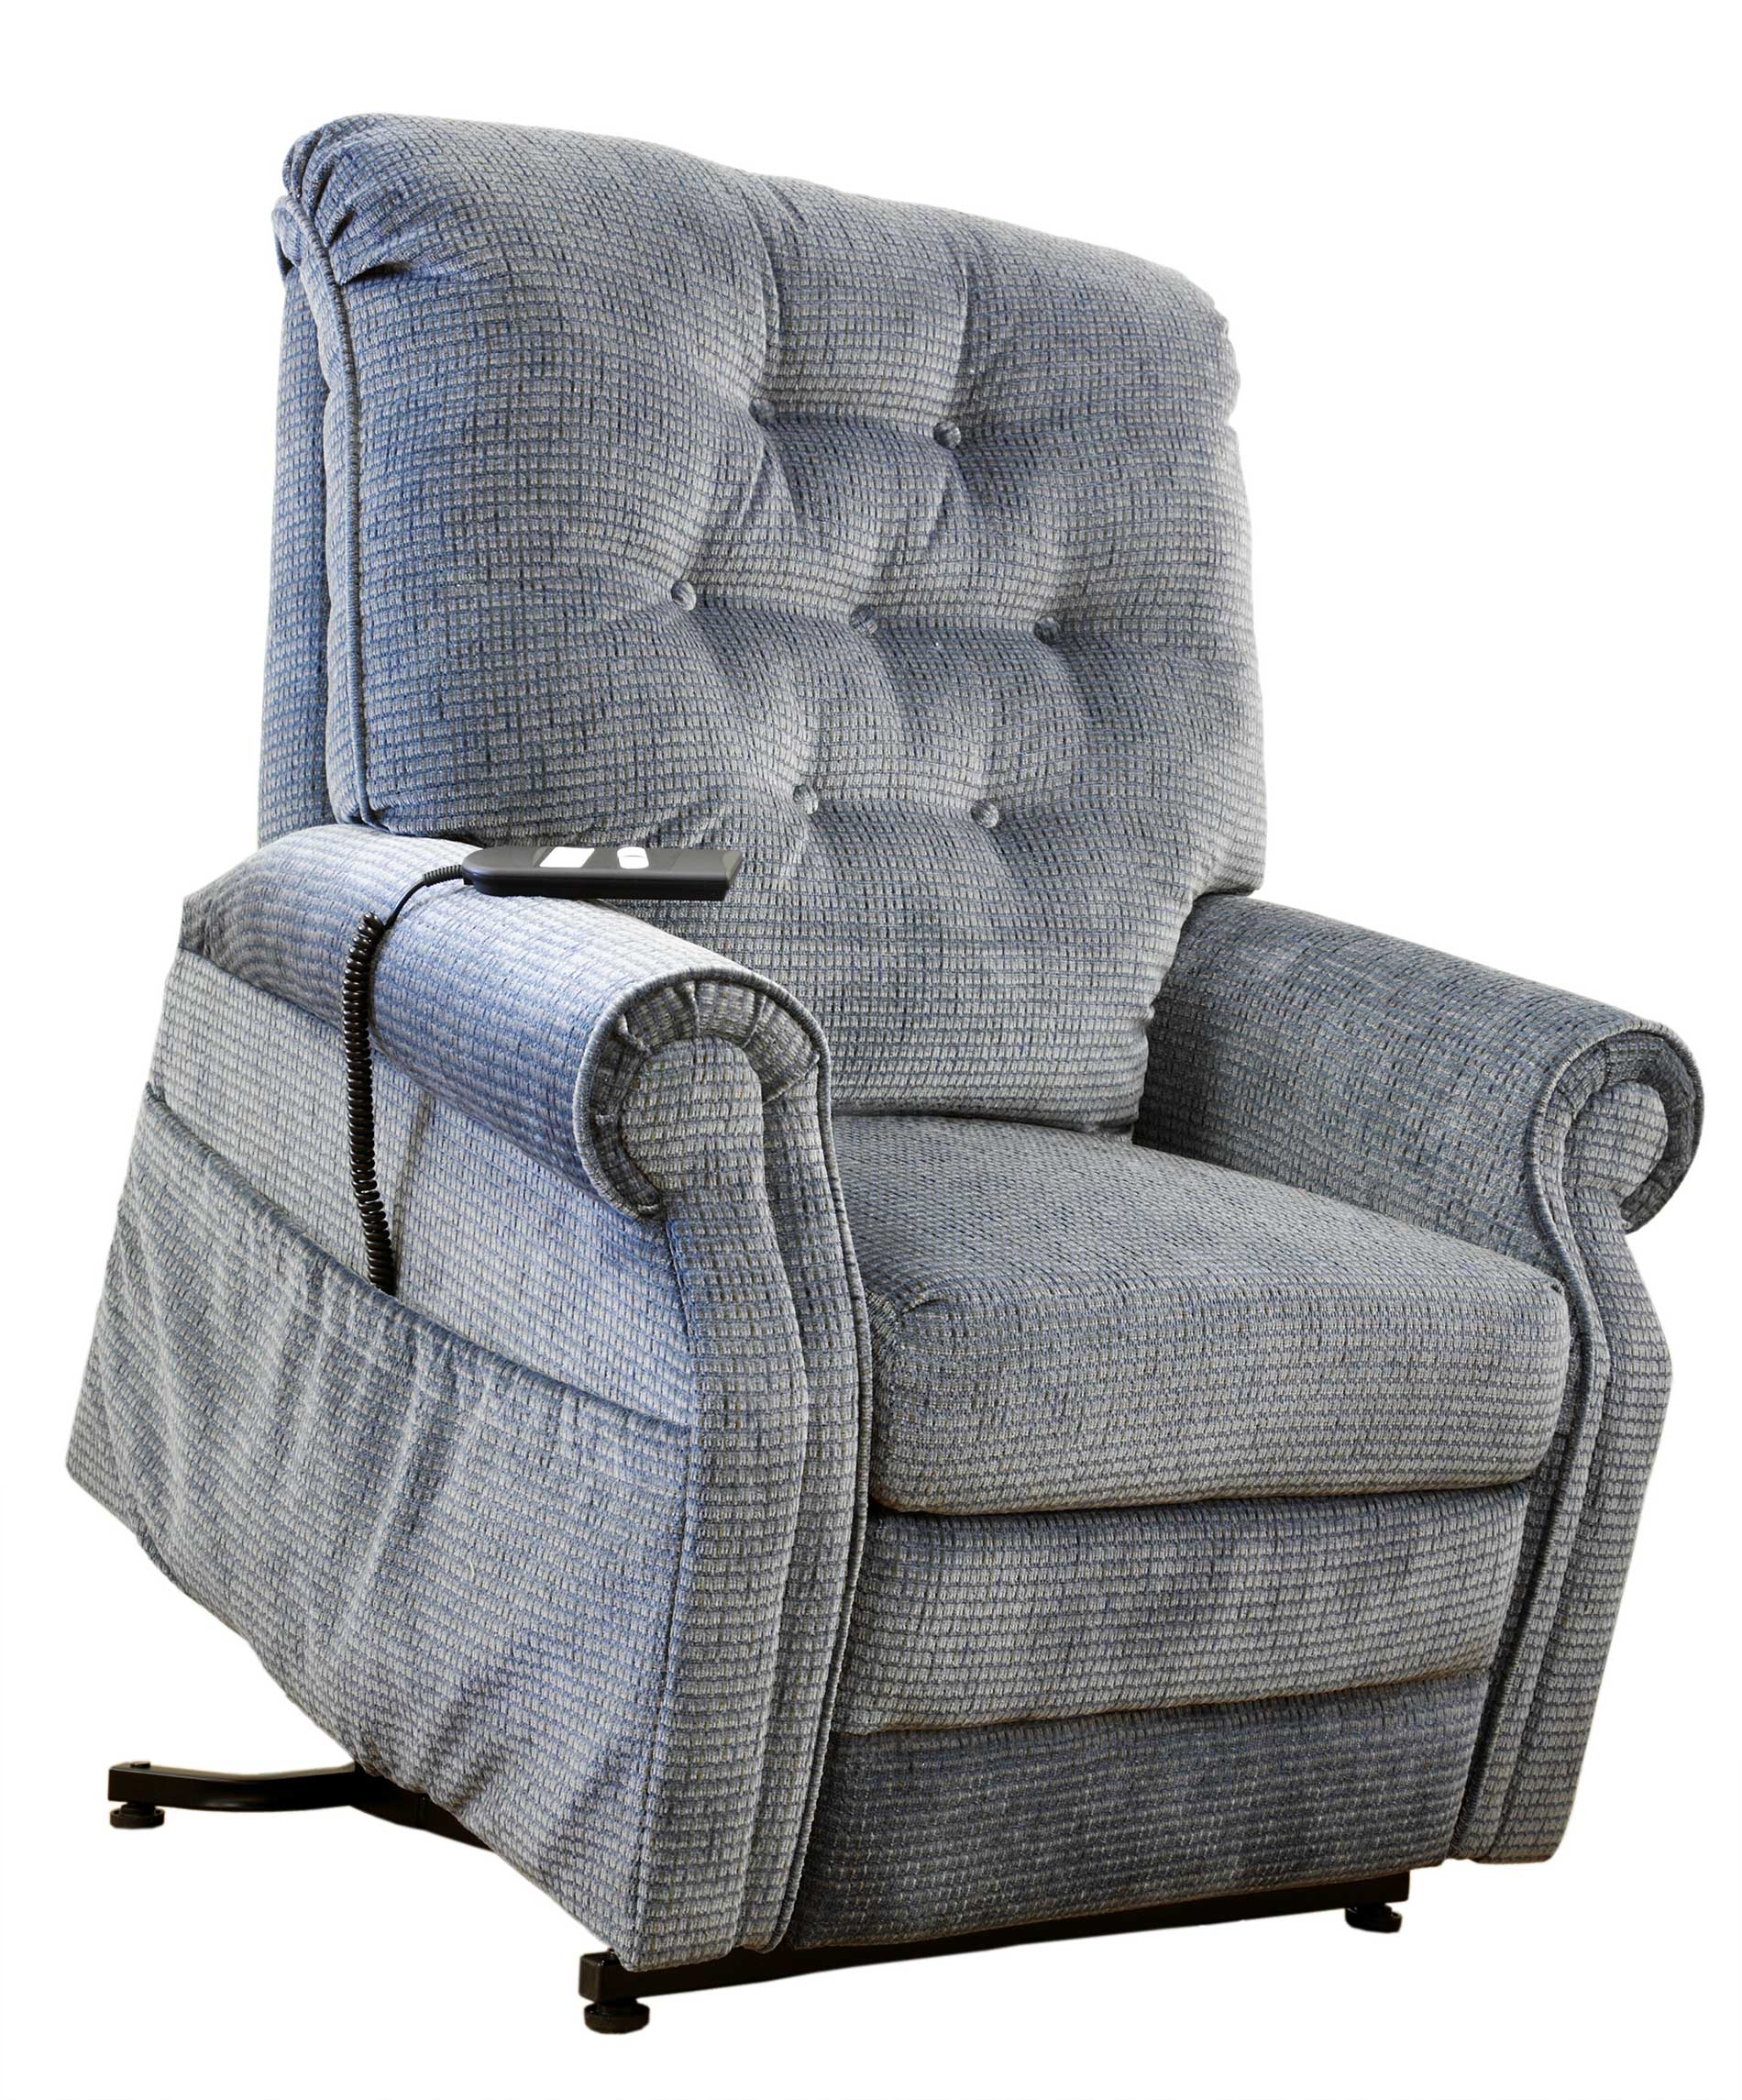 featuredimage-Finding-the-Perfect-Lift-Chair-for-Comfort-and-Safety